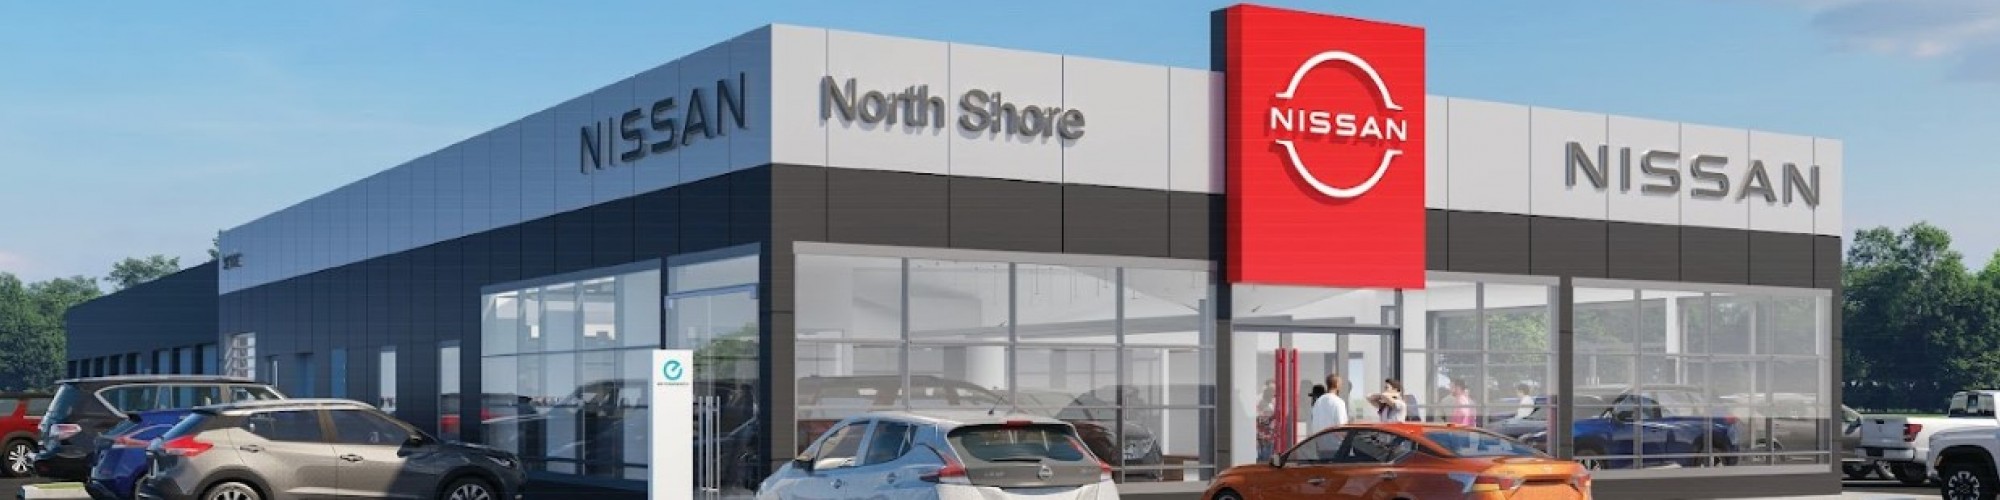 North Shore Nissan cover image